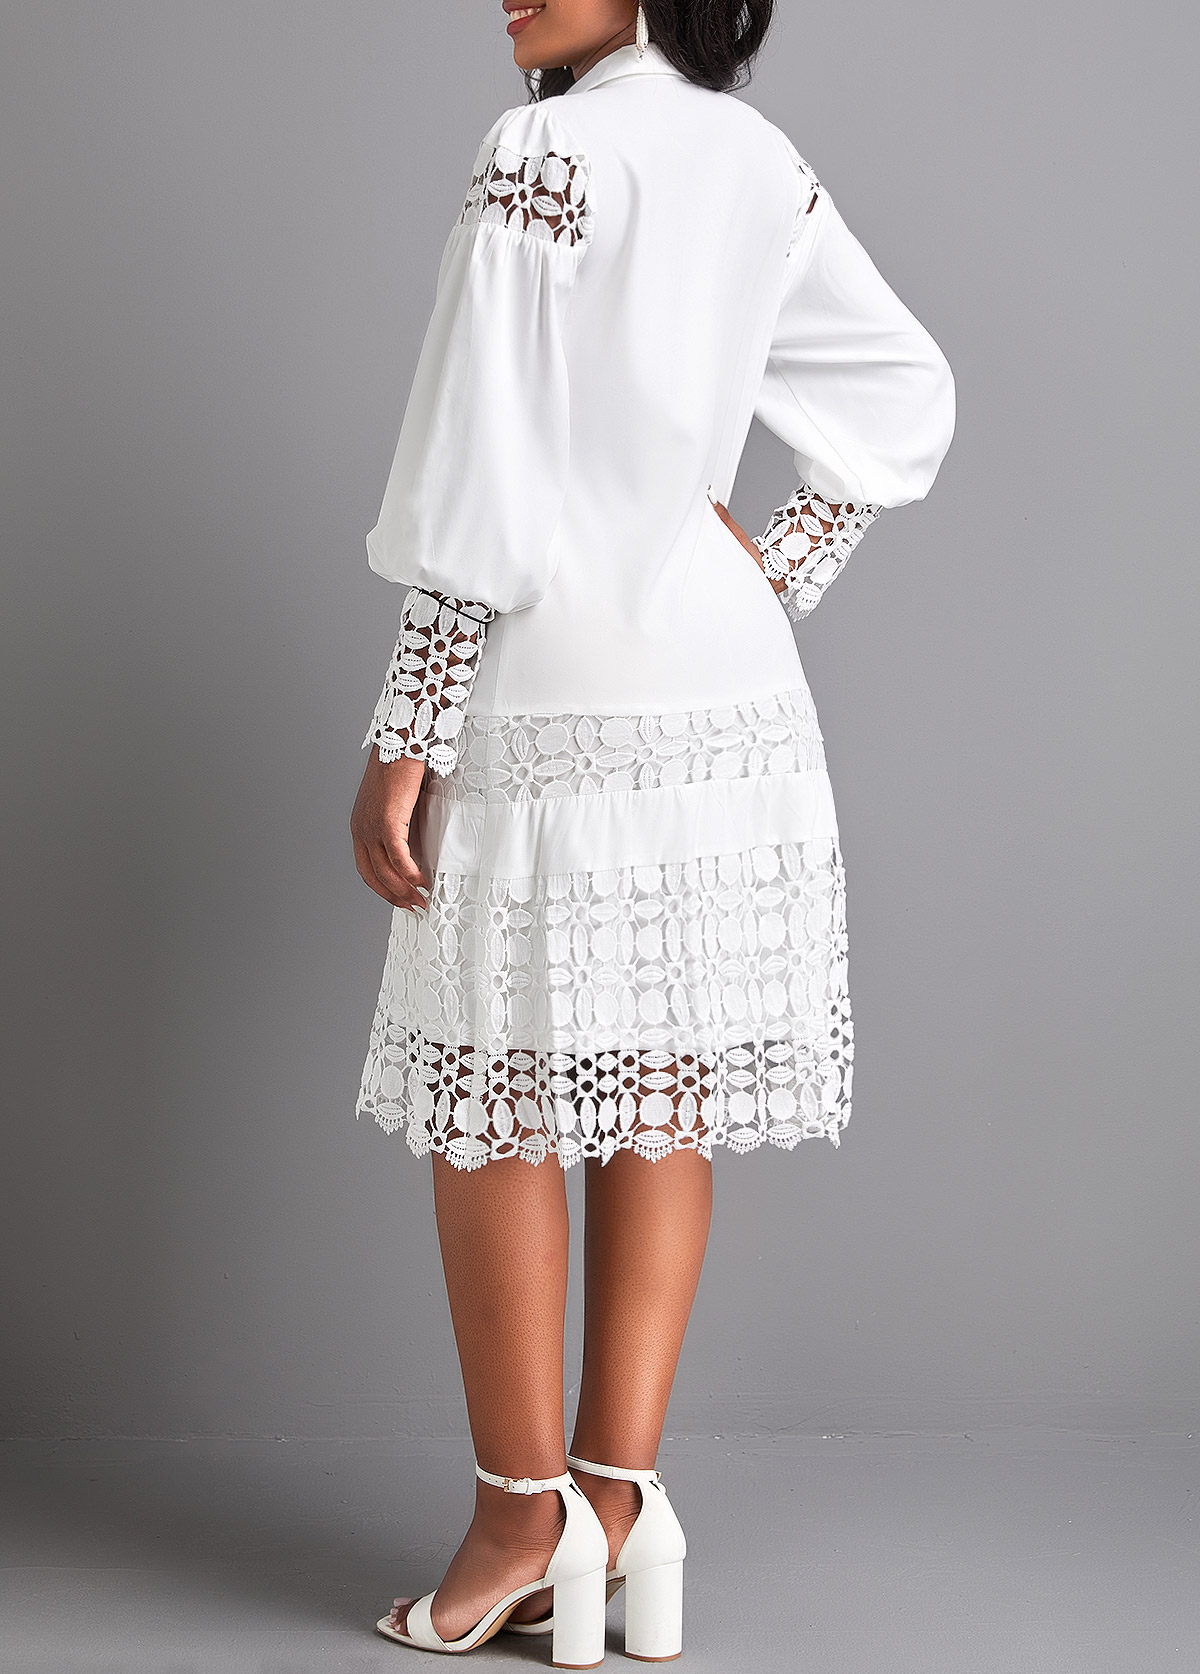 Patchwork White Lace Short Sleeve Dress